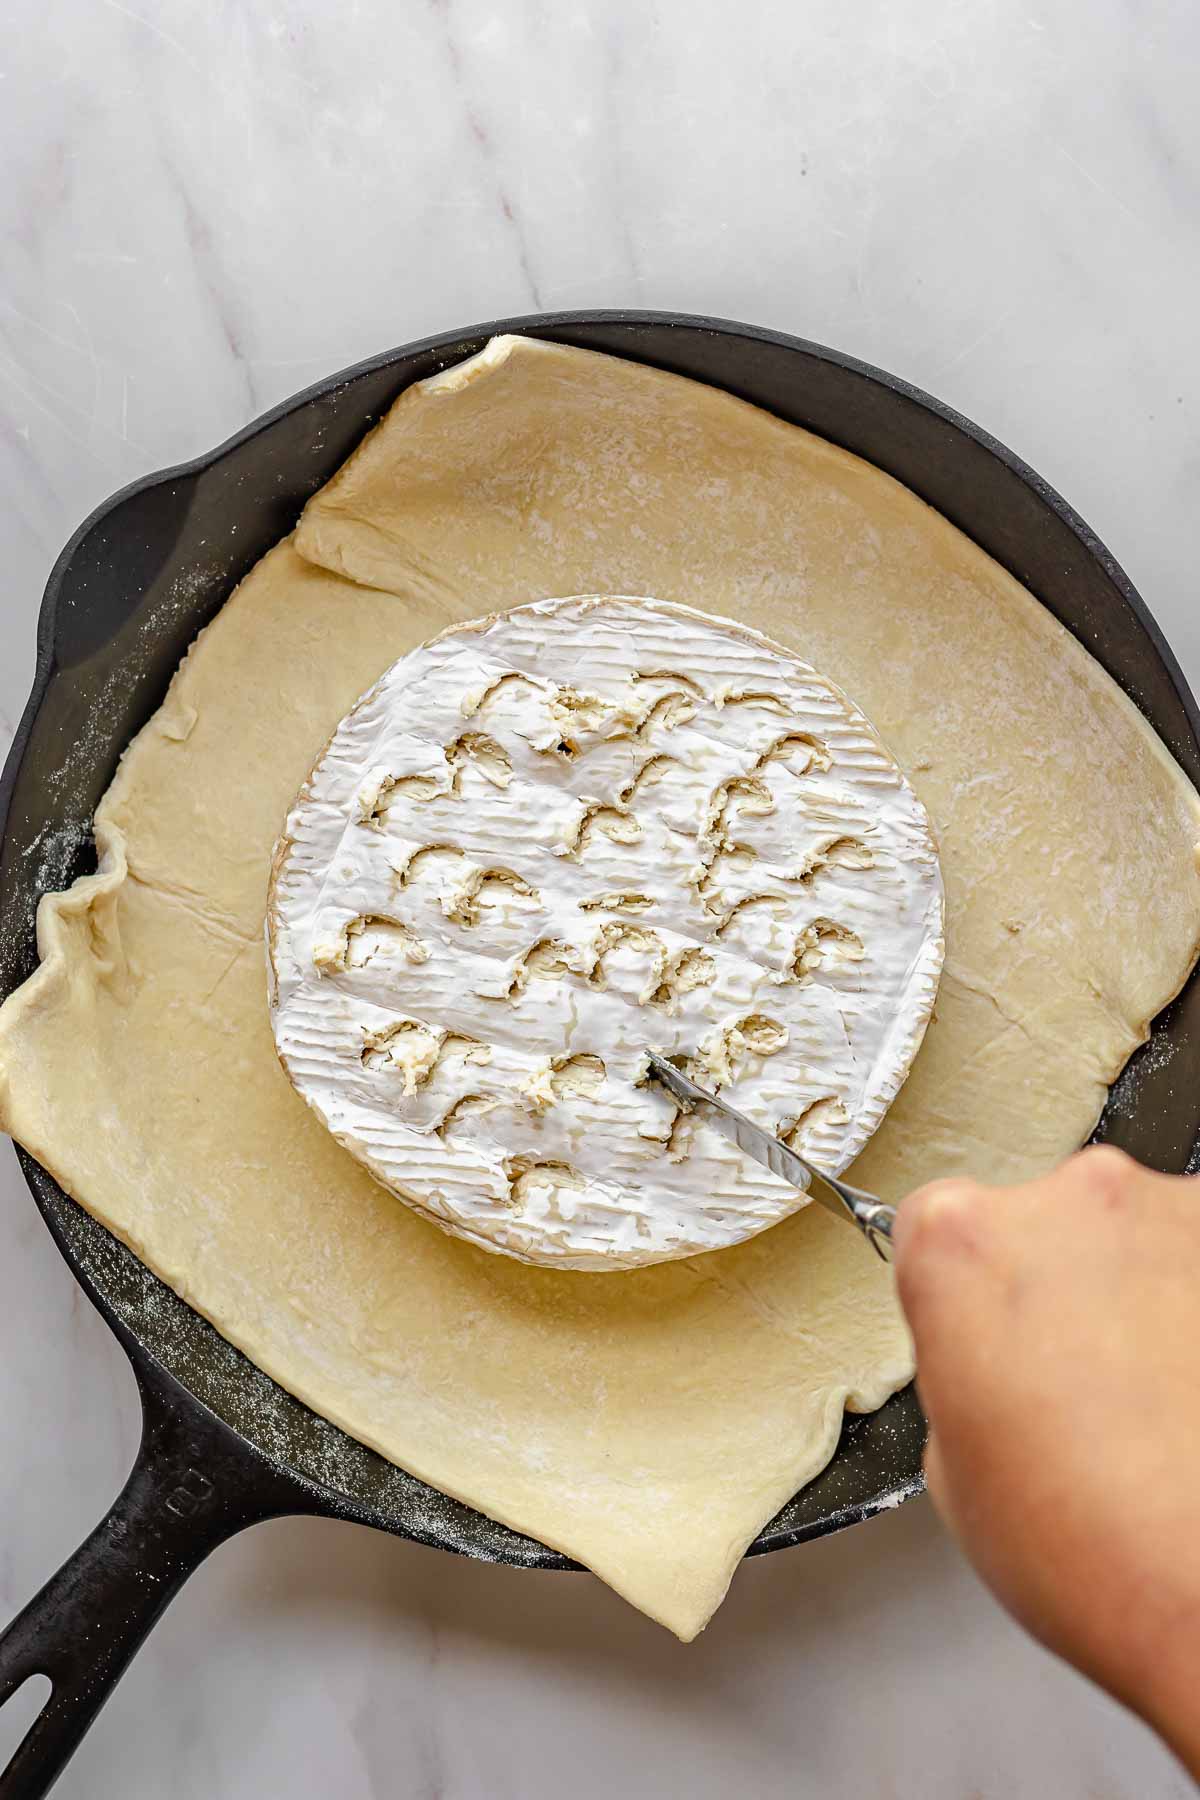 Brie on top of puff pastry and a knife cutting holes into the rind.